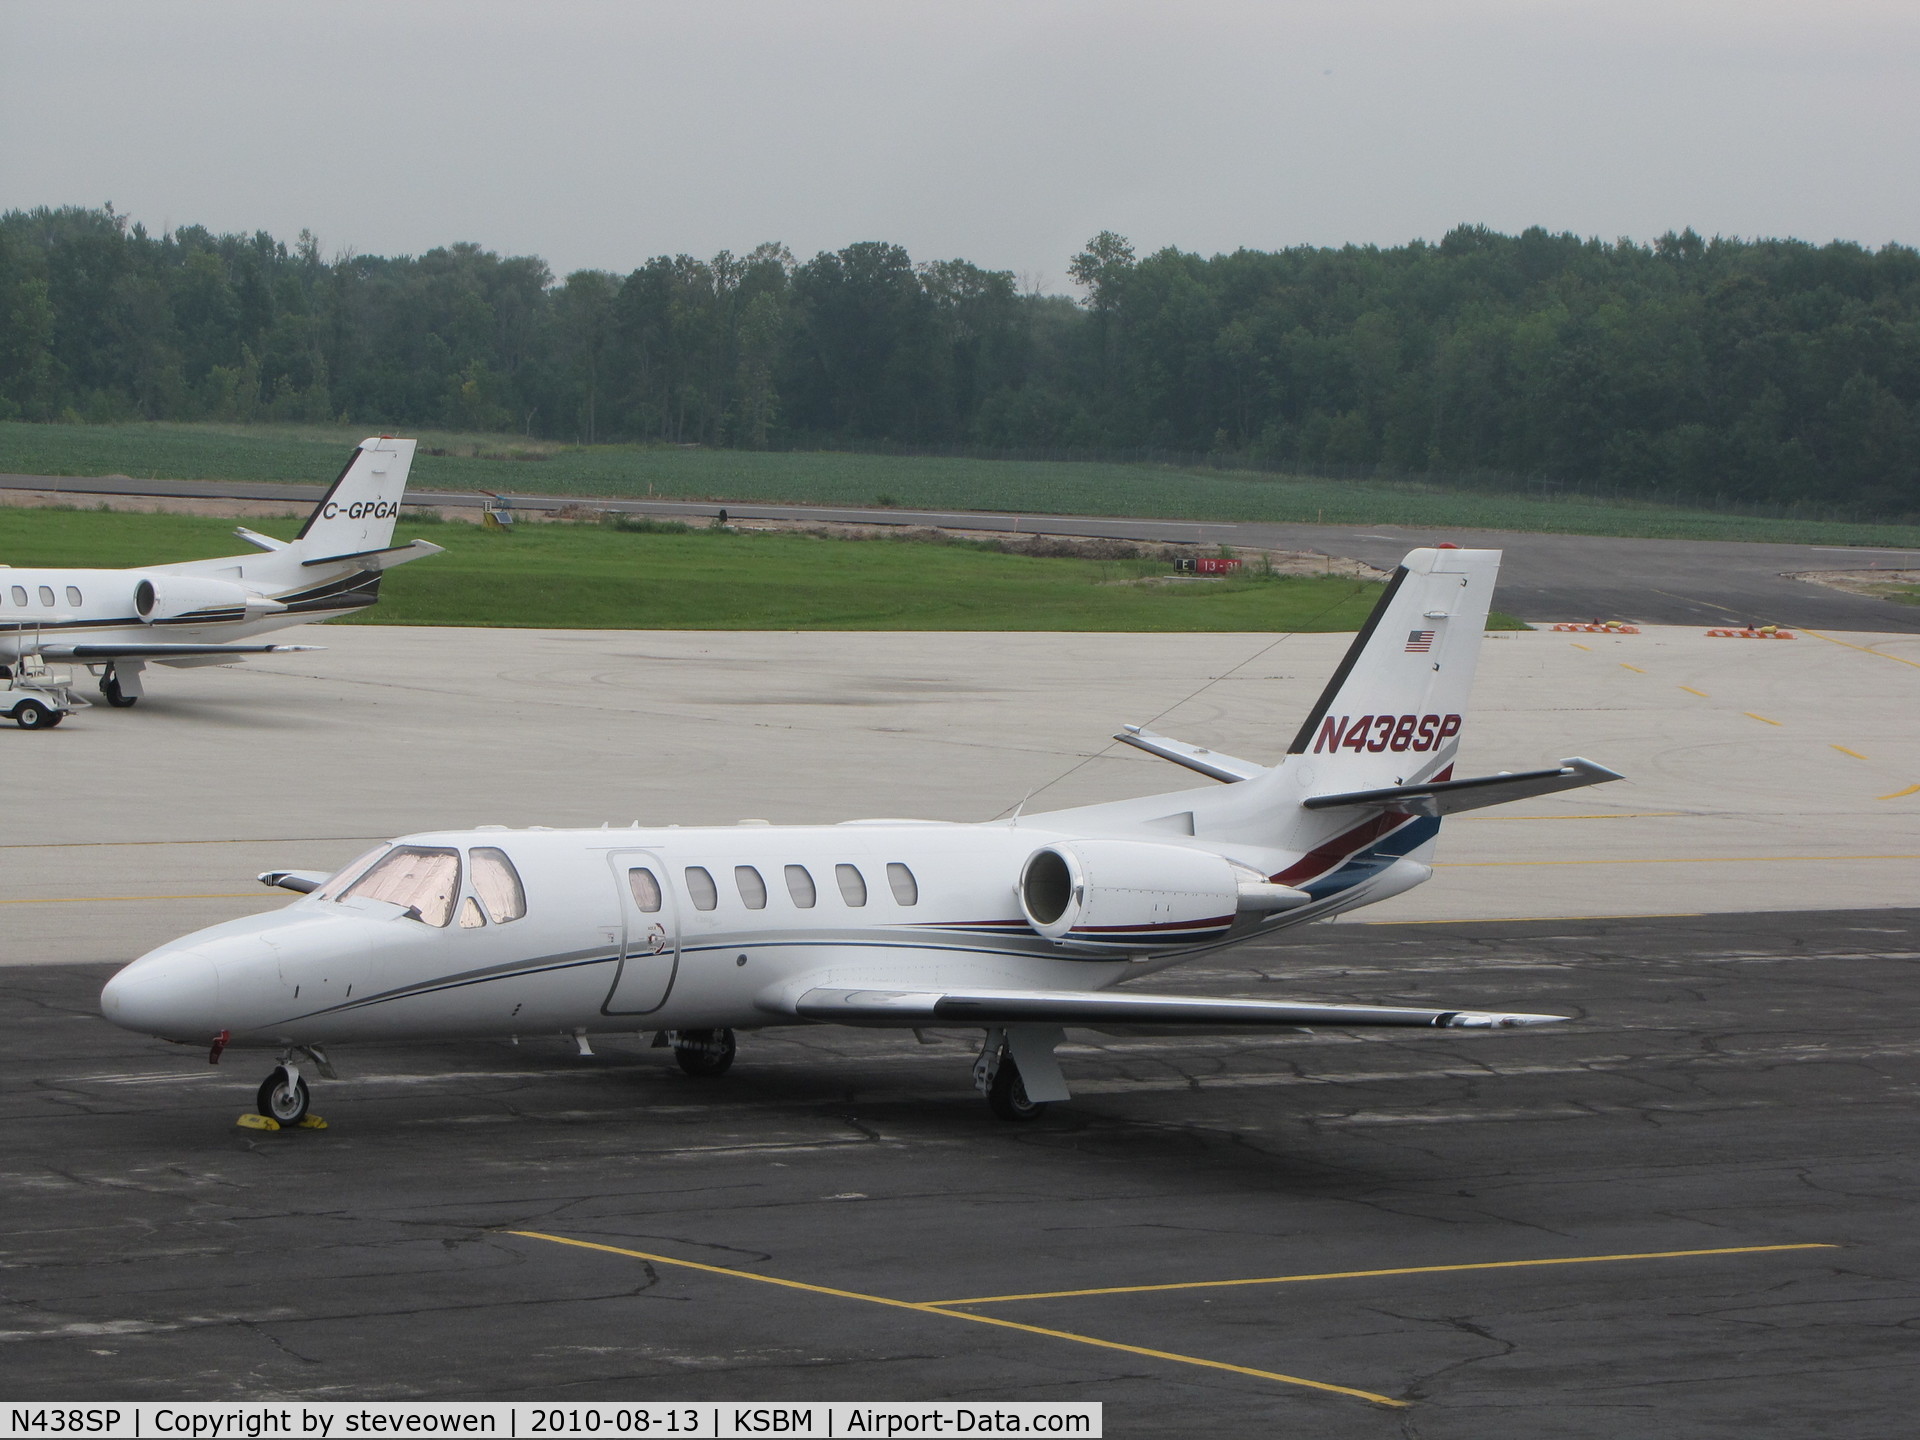 N438SP, Cessna 550 C/N 550-1026, On the ramp at KSBM during the PGA Tour